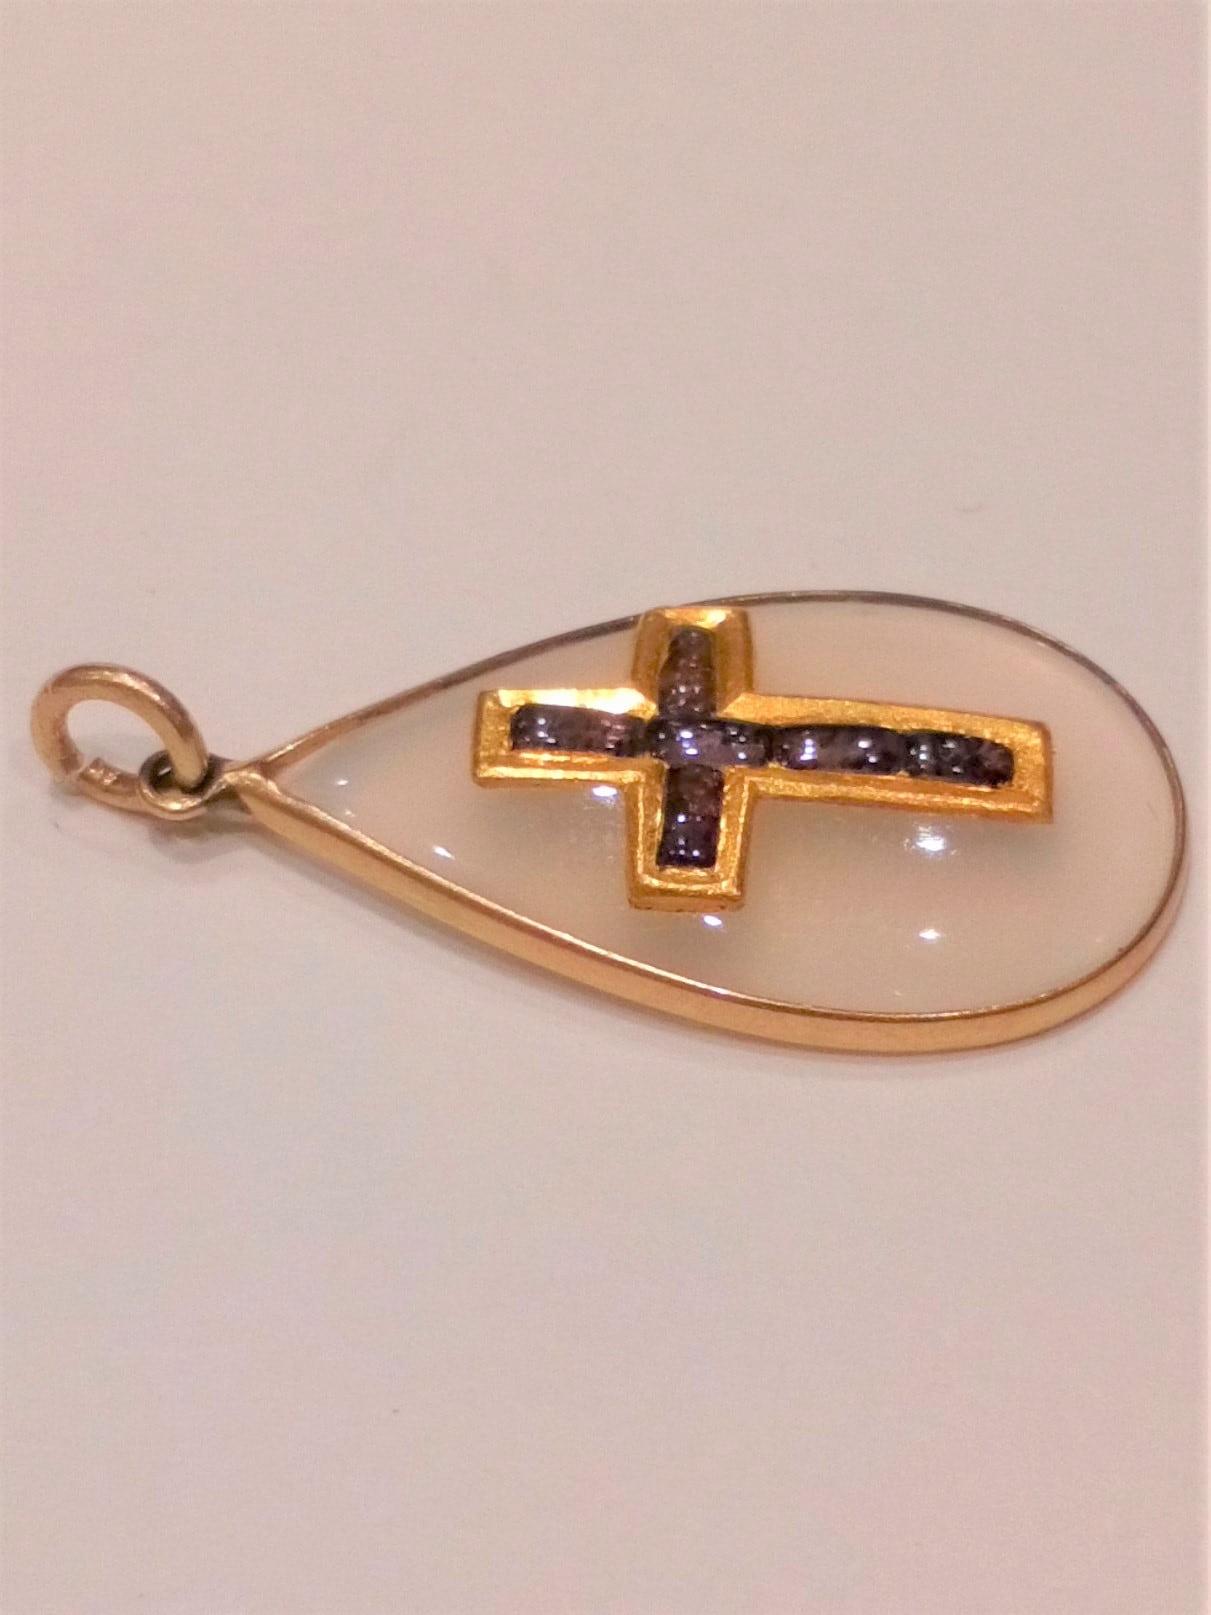 Antique 18ct gold chalcedony teardrop pendant with amethyst inlaid gold cross circa 1840